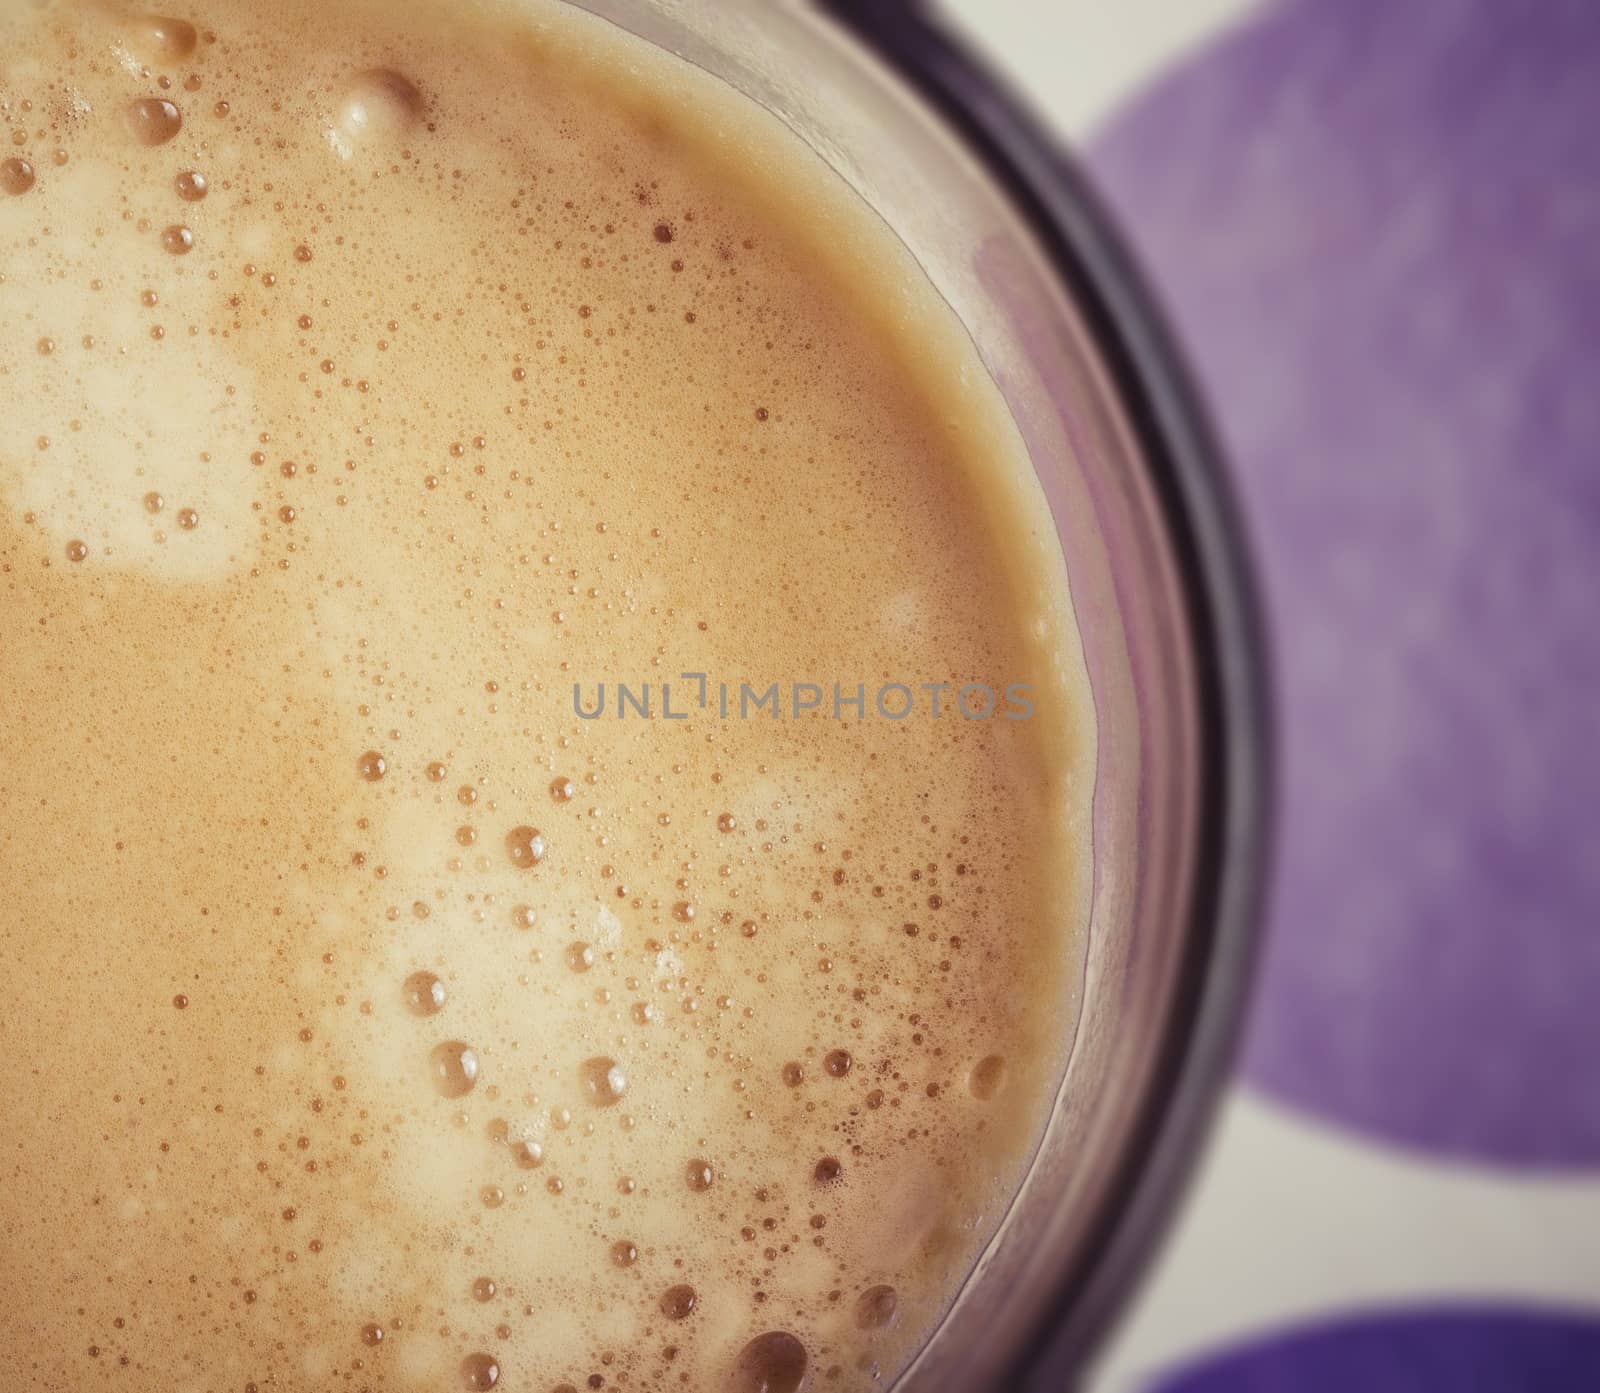 Macro picture of a cup of coffee.